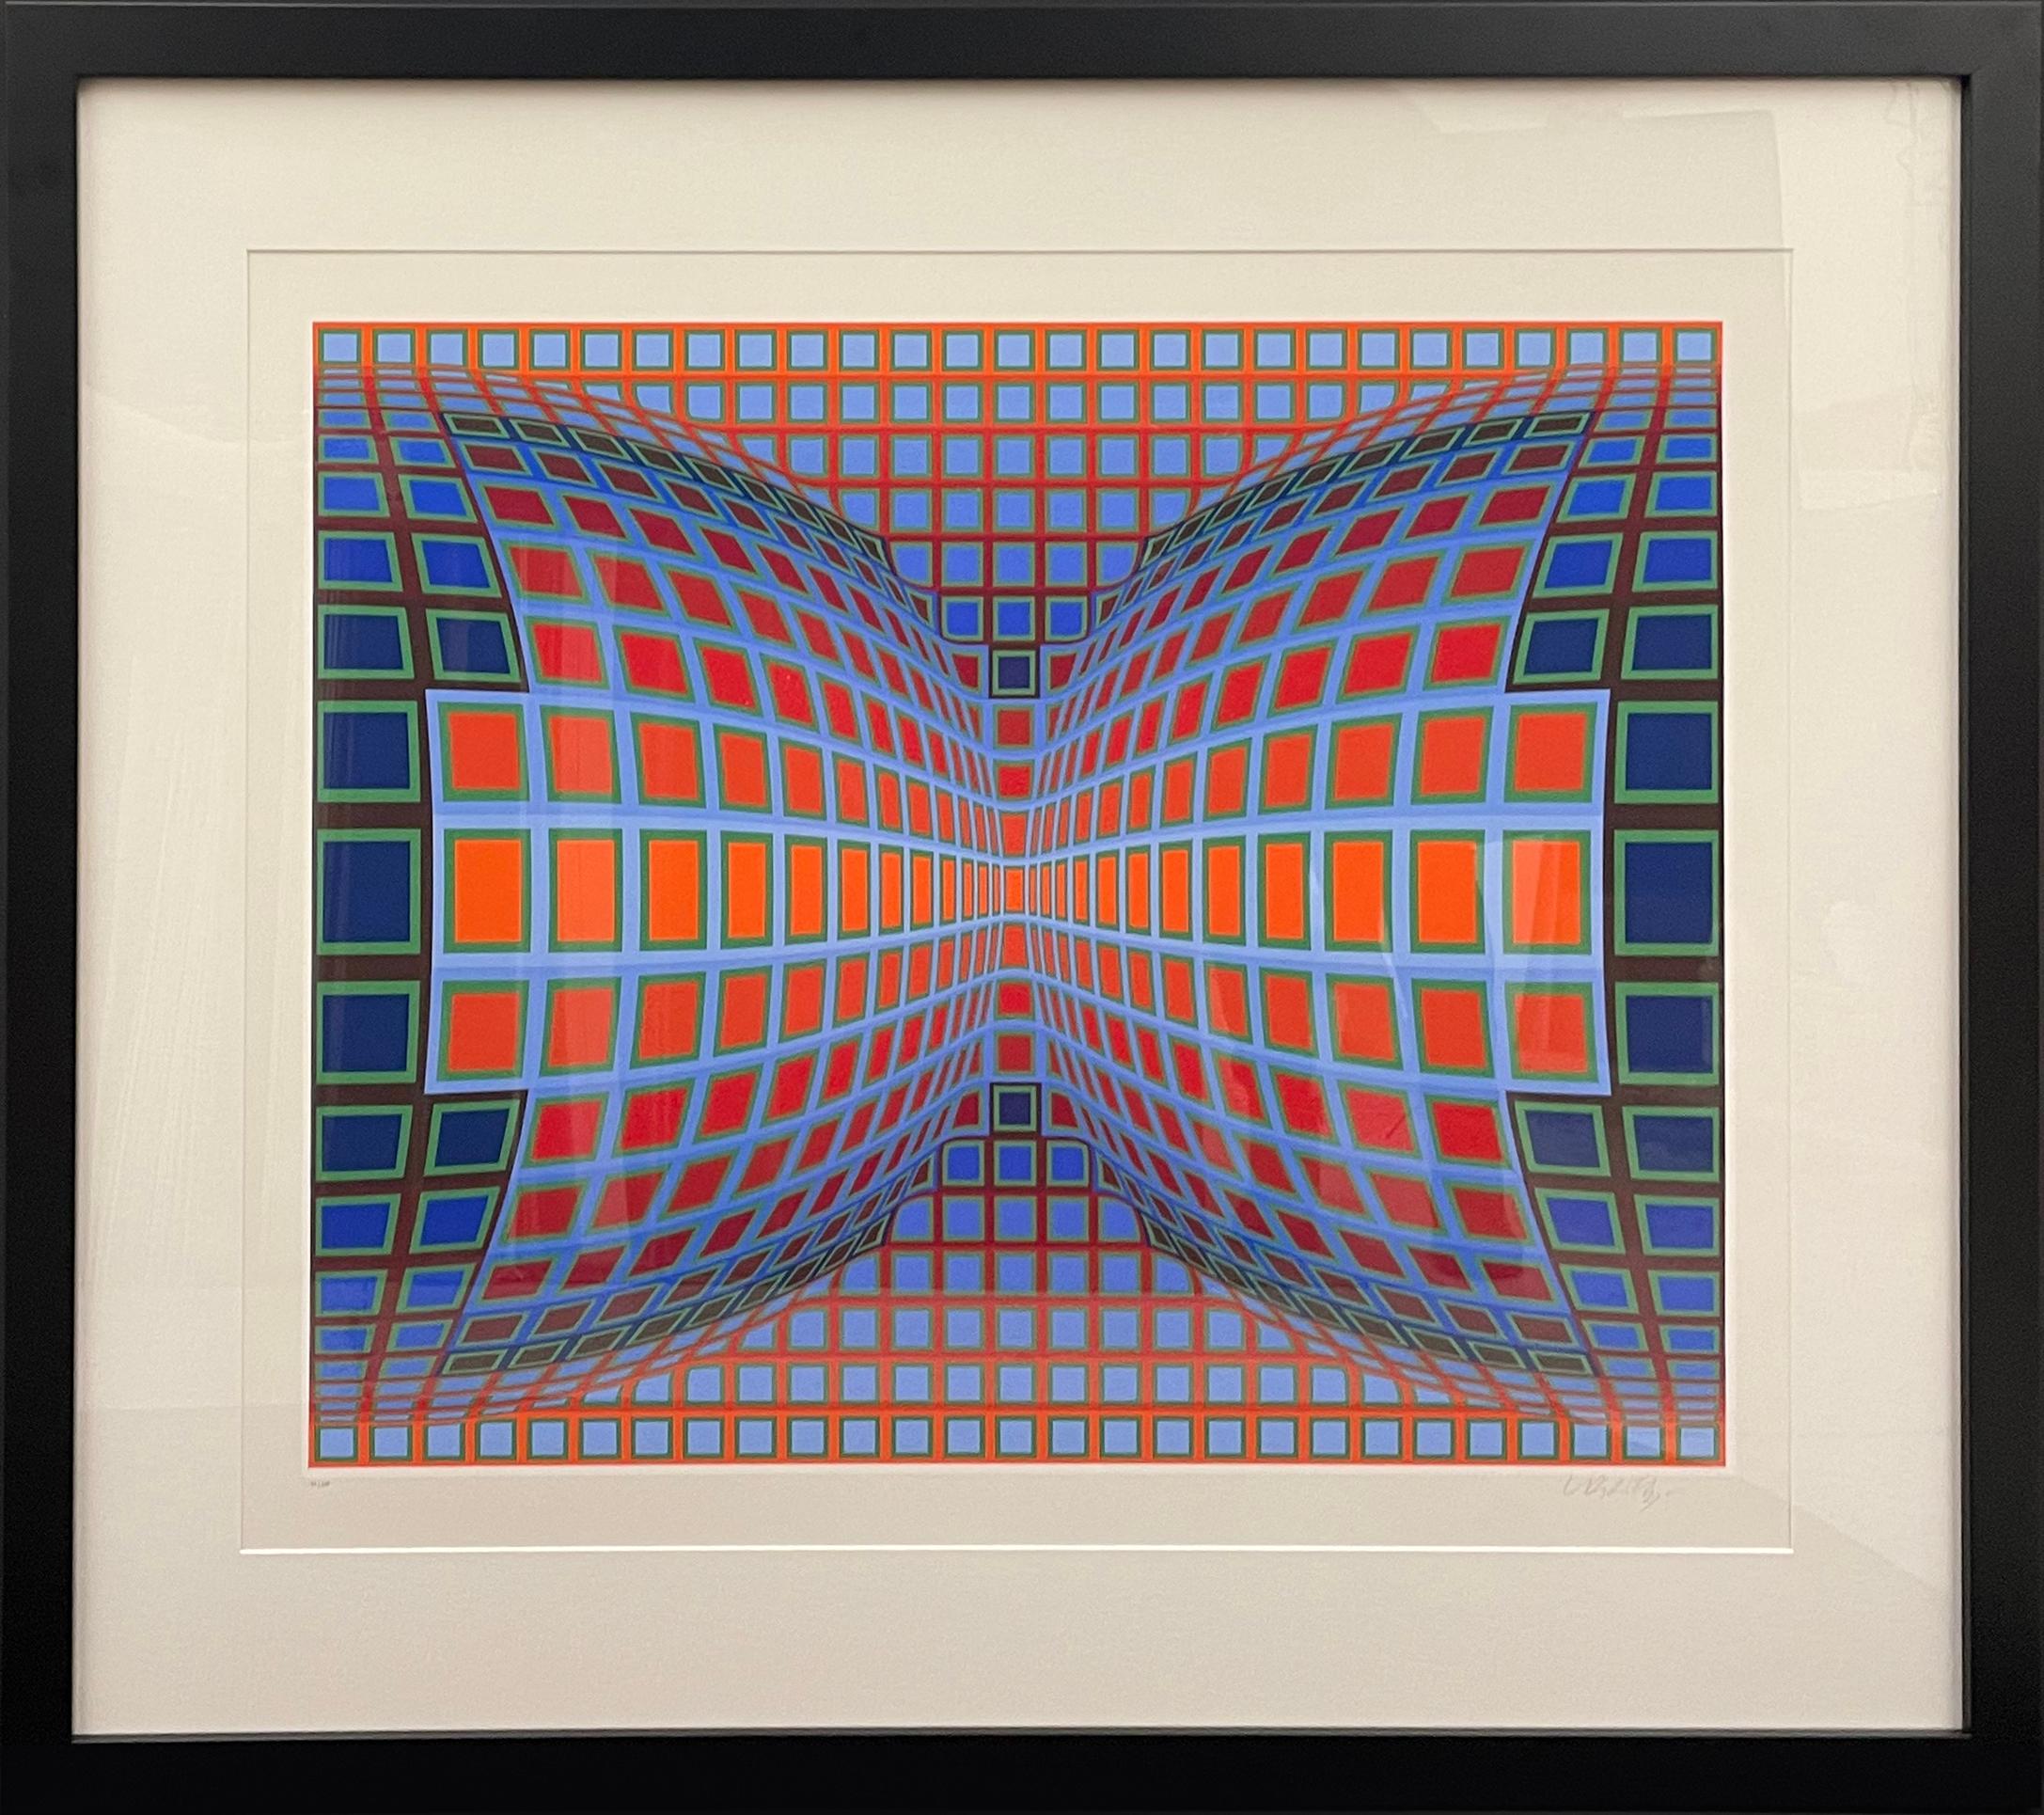 hungarian artist victor vasarely